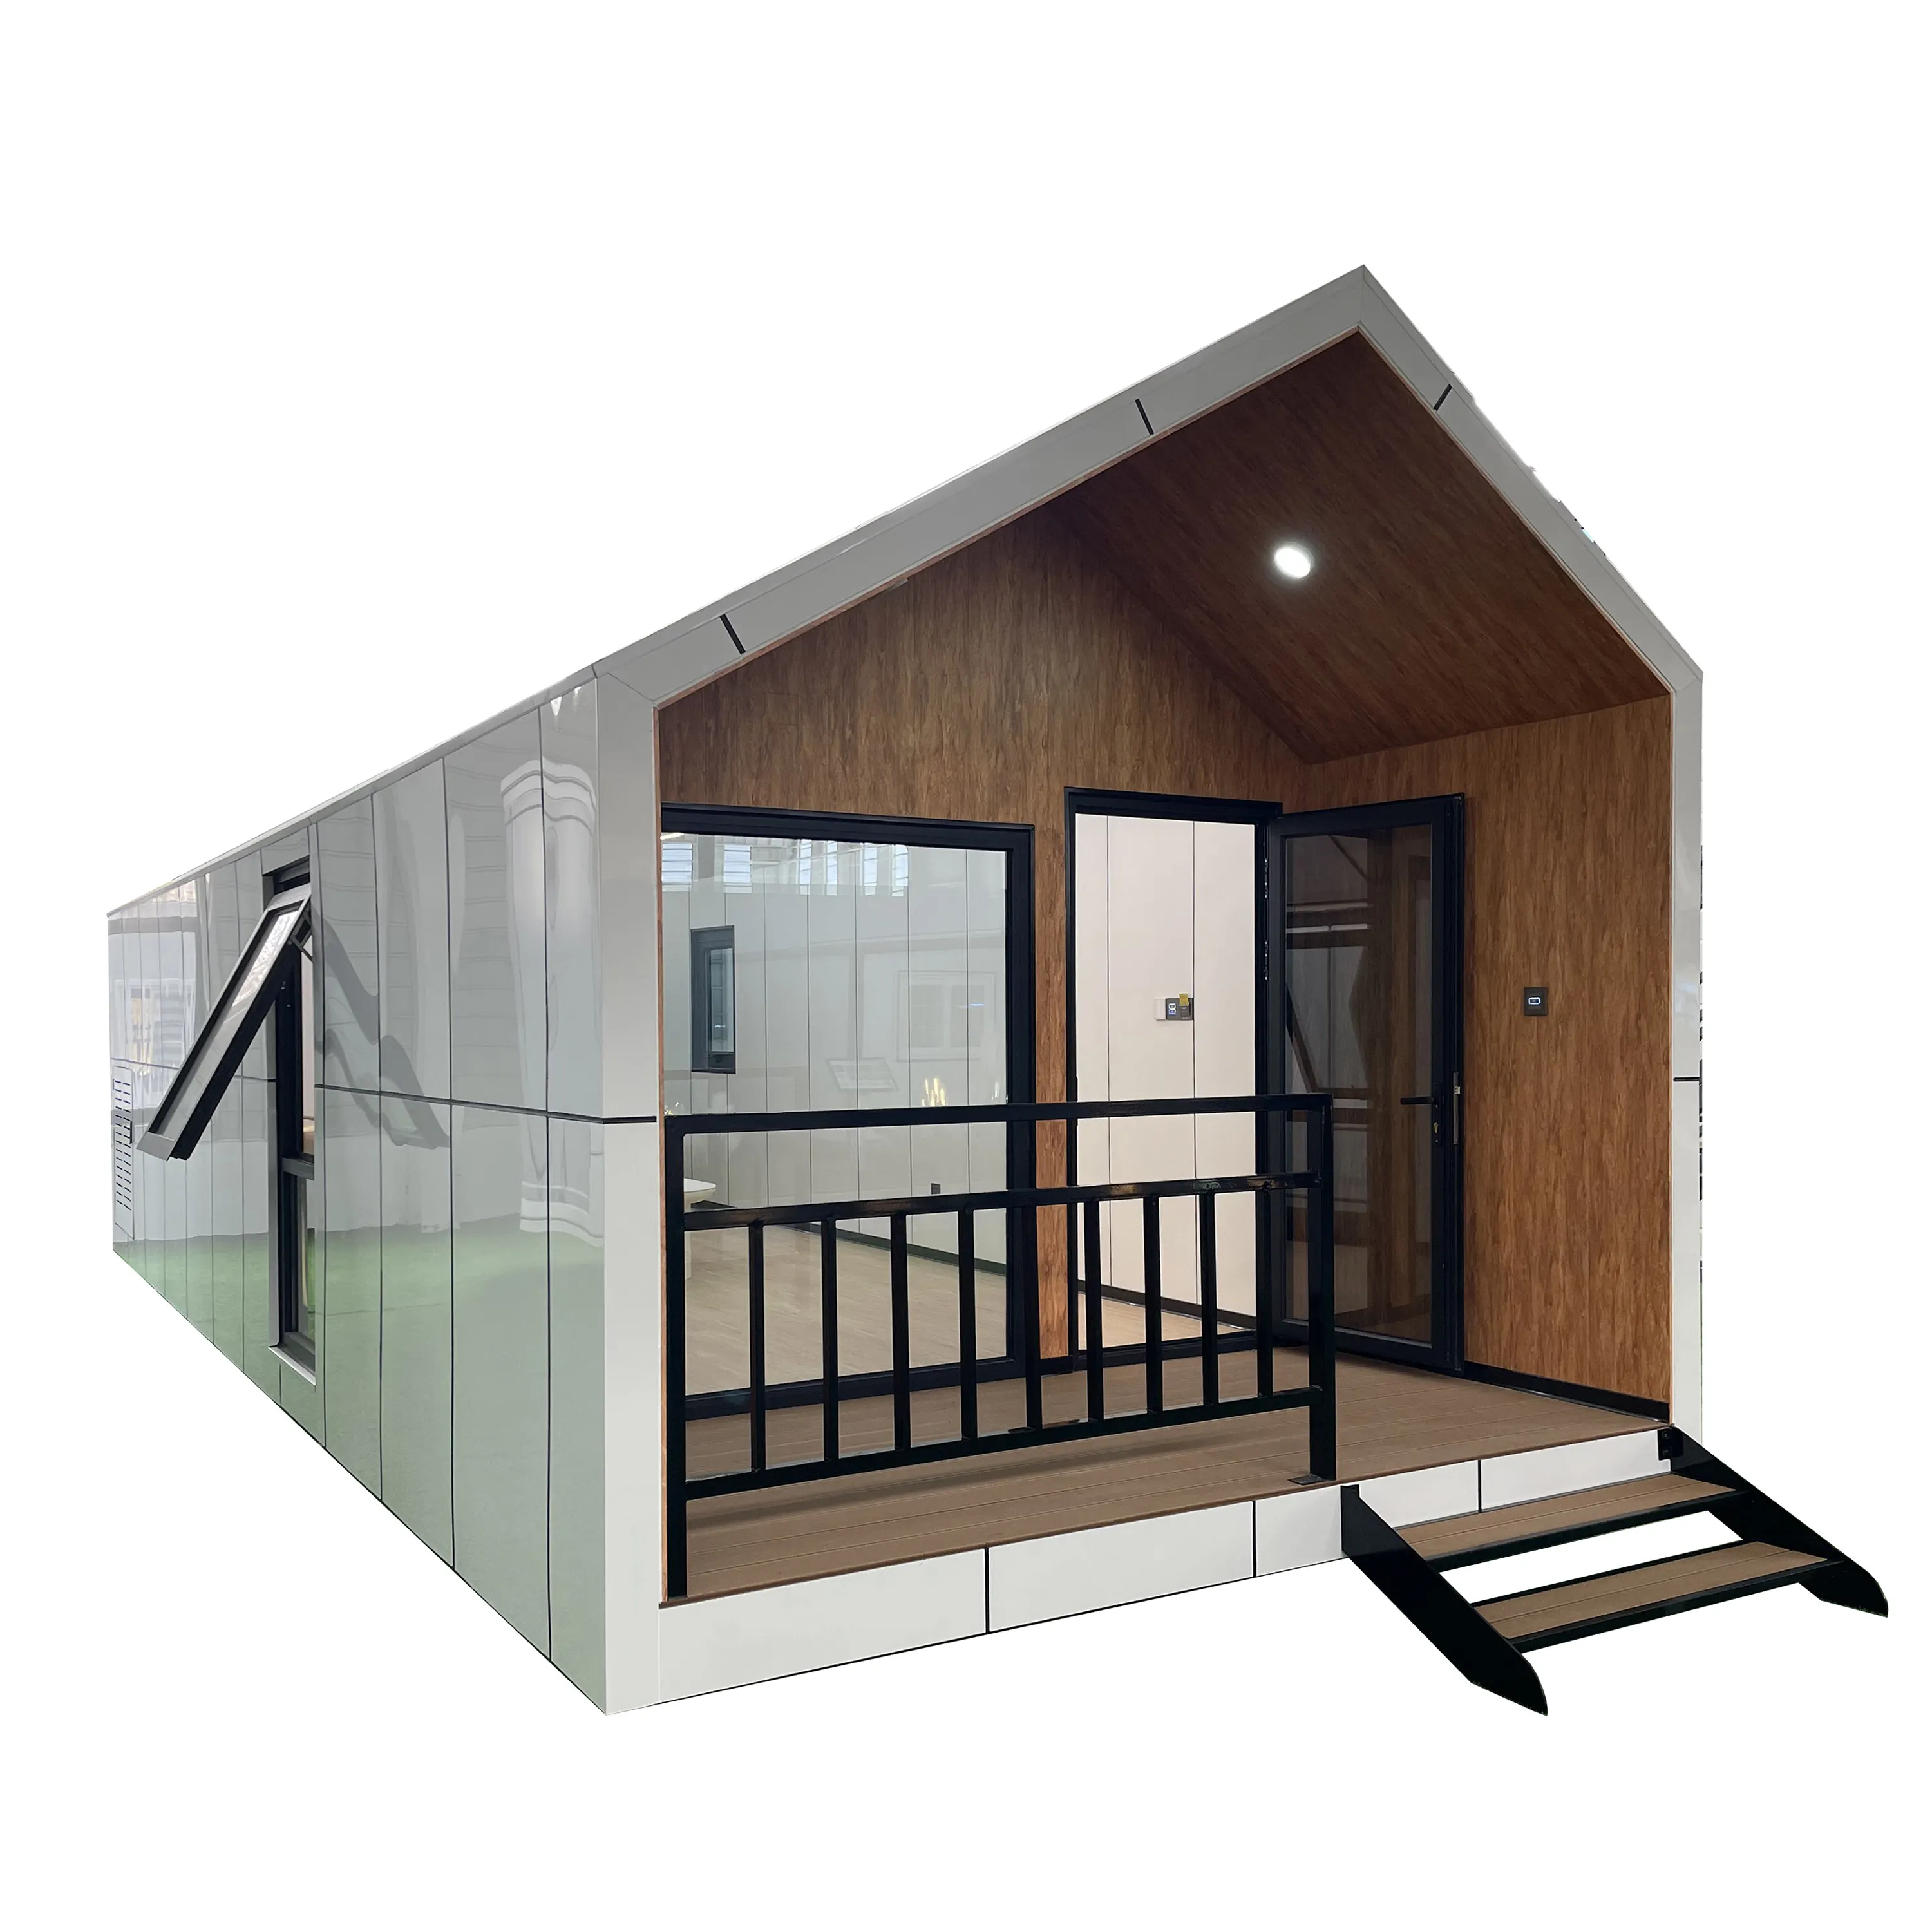 Modular Mobile Triangular Roof Low Cost Modern Style Tiny Homes Smart System Vacation House For Commercial Sale